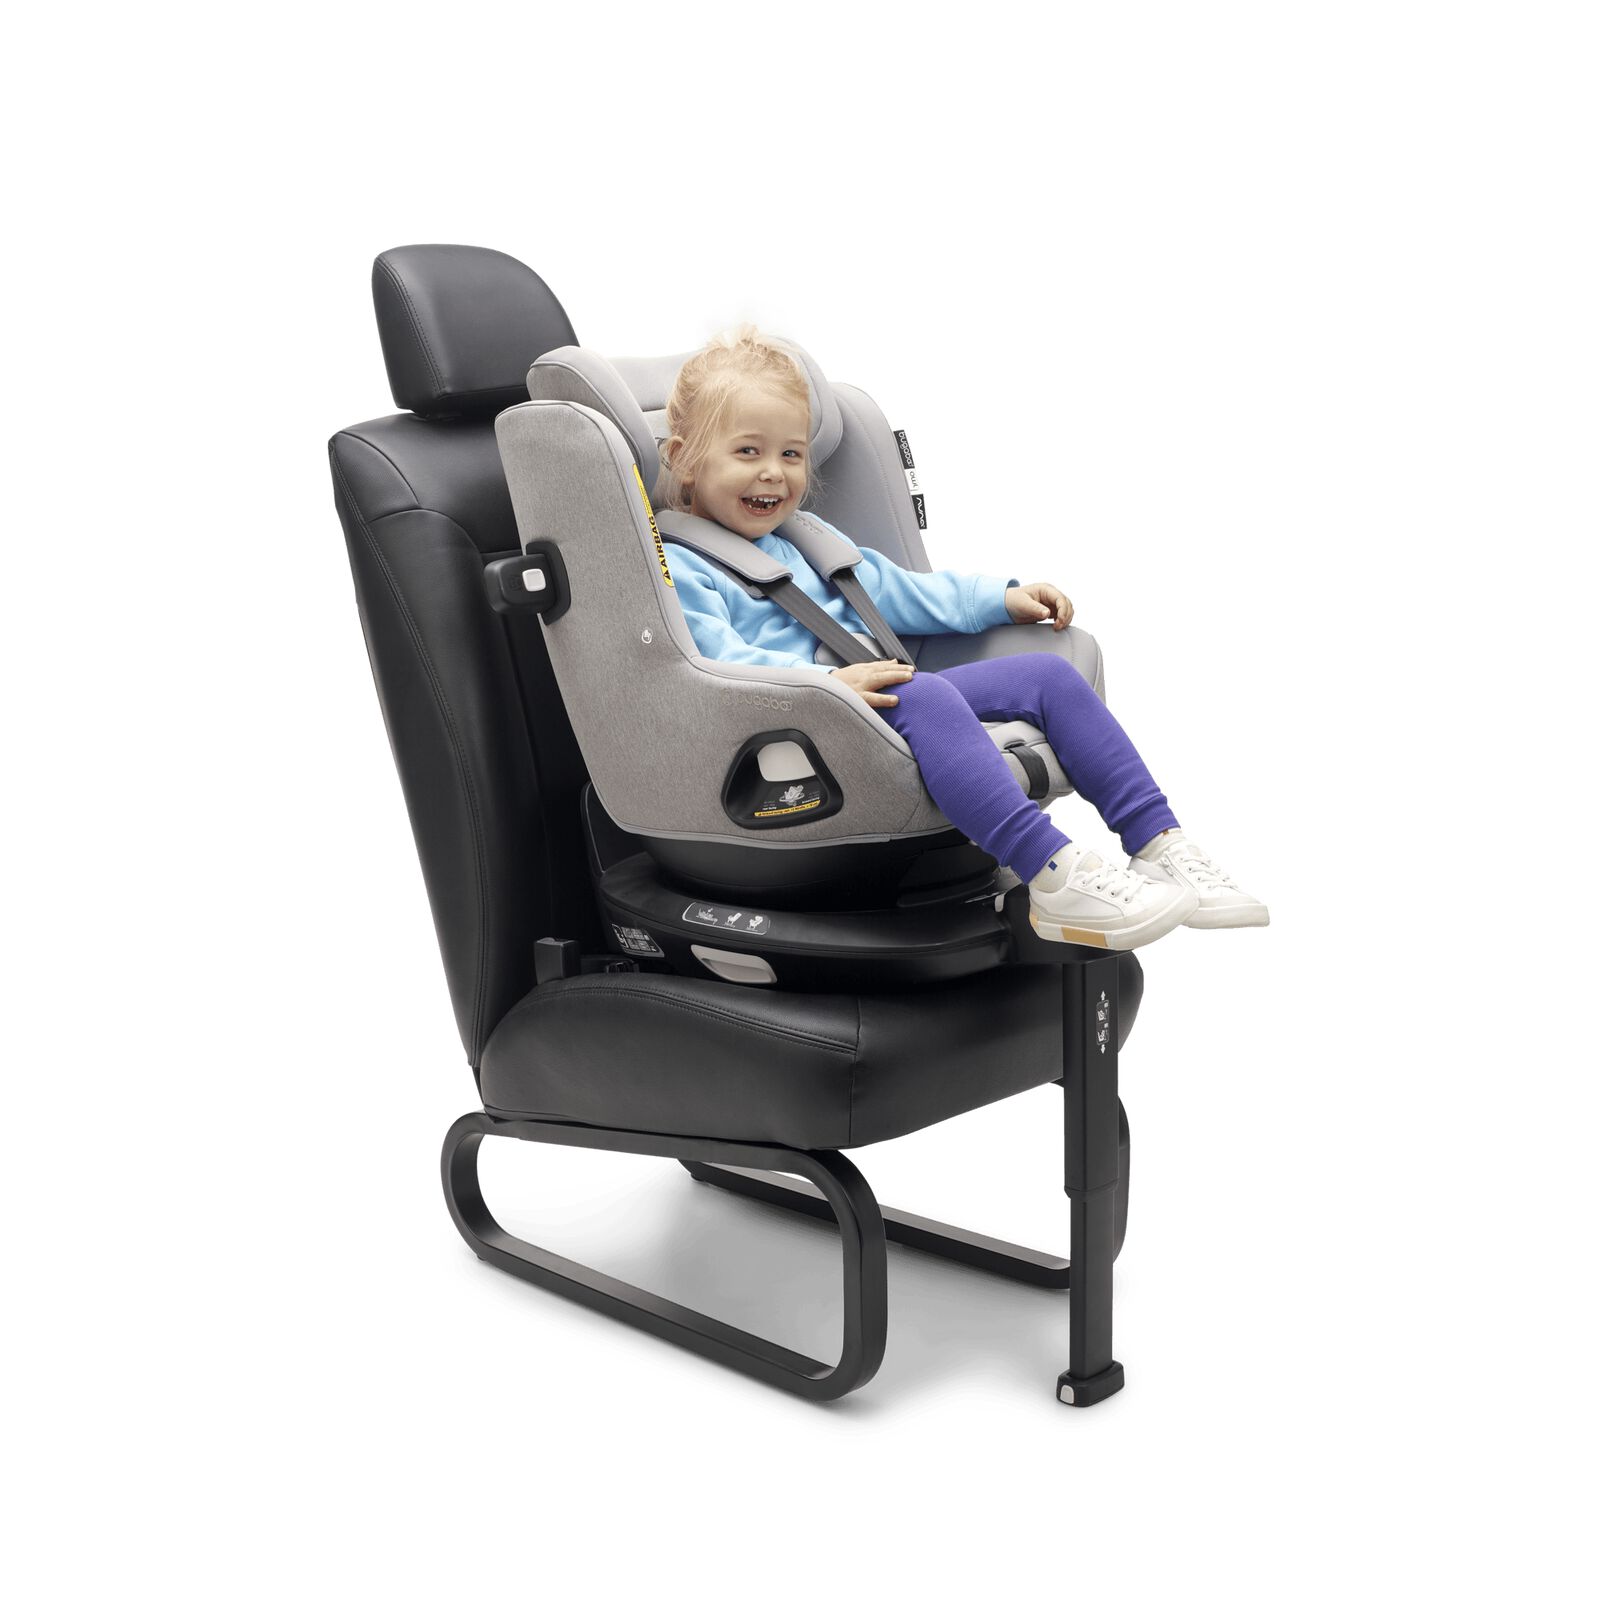 A happy toddler safely seated in the Bugaboo Owl by Nuna with 360 ISOFIX Base.